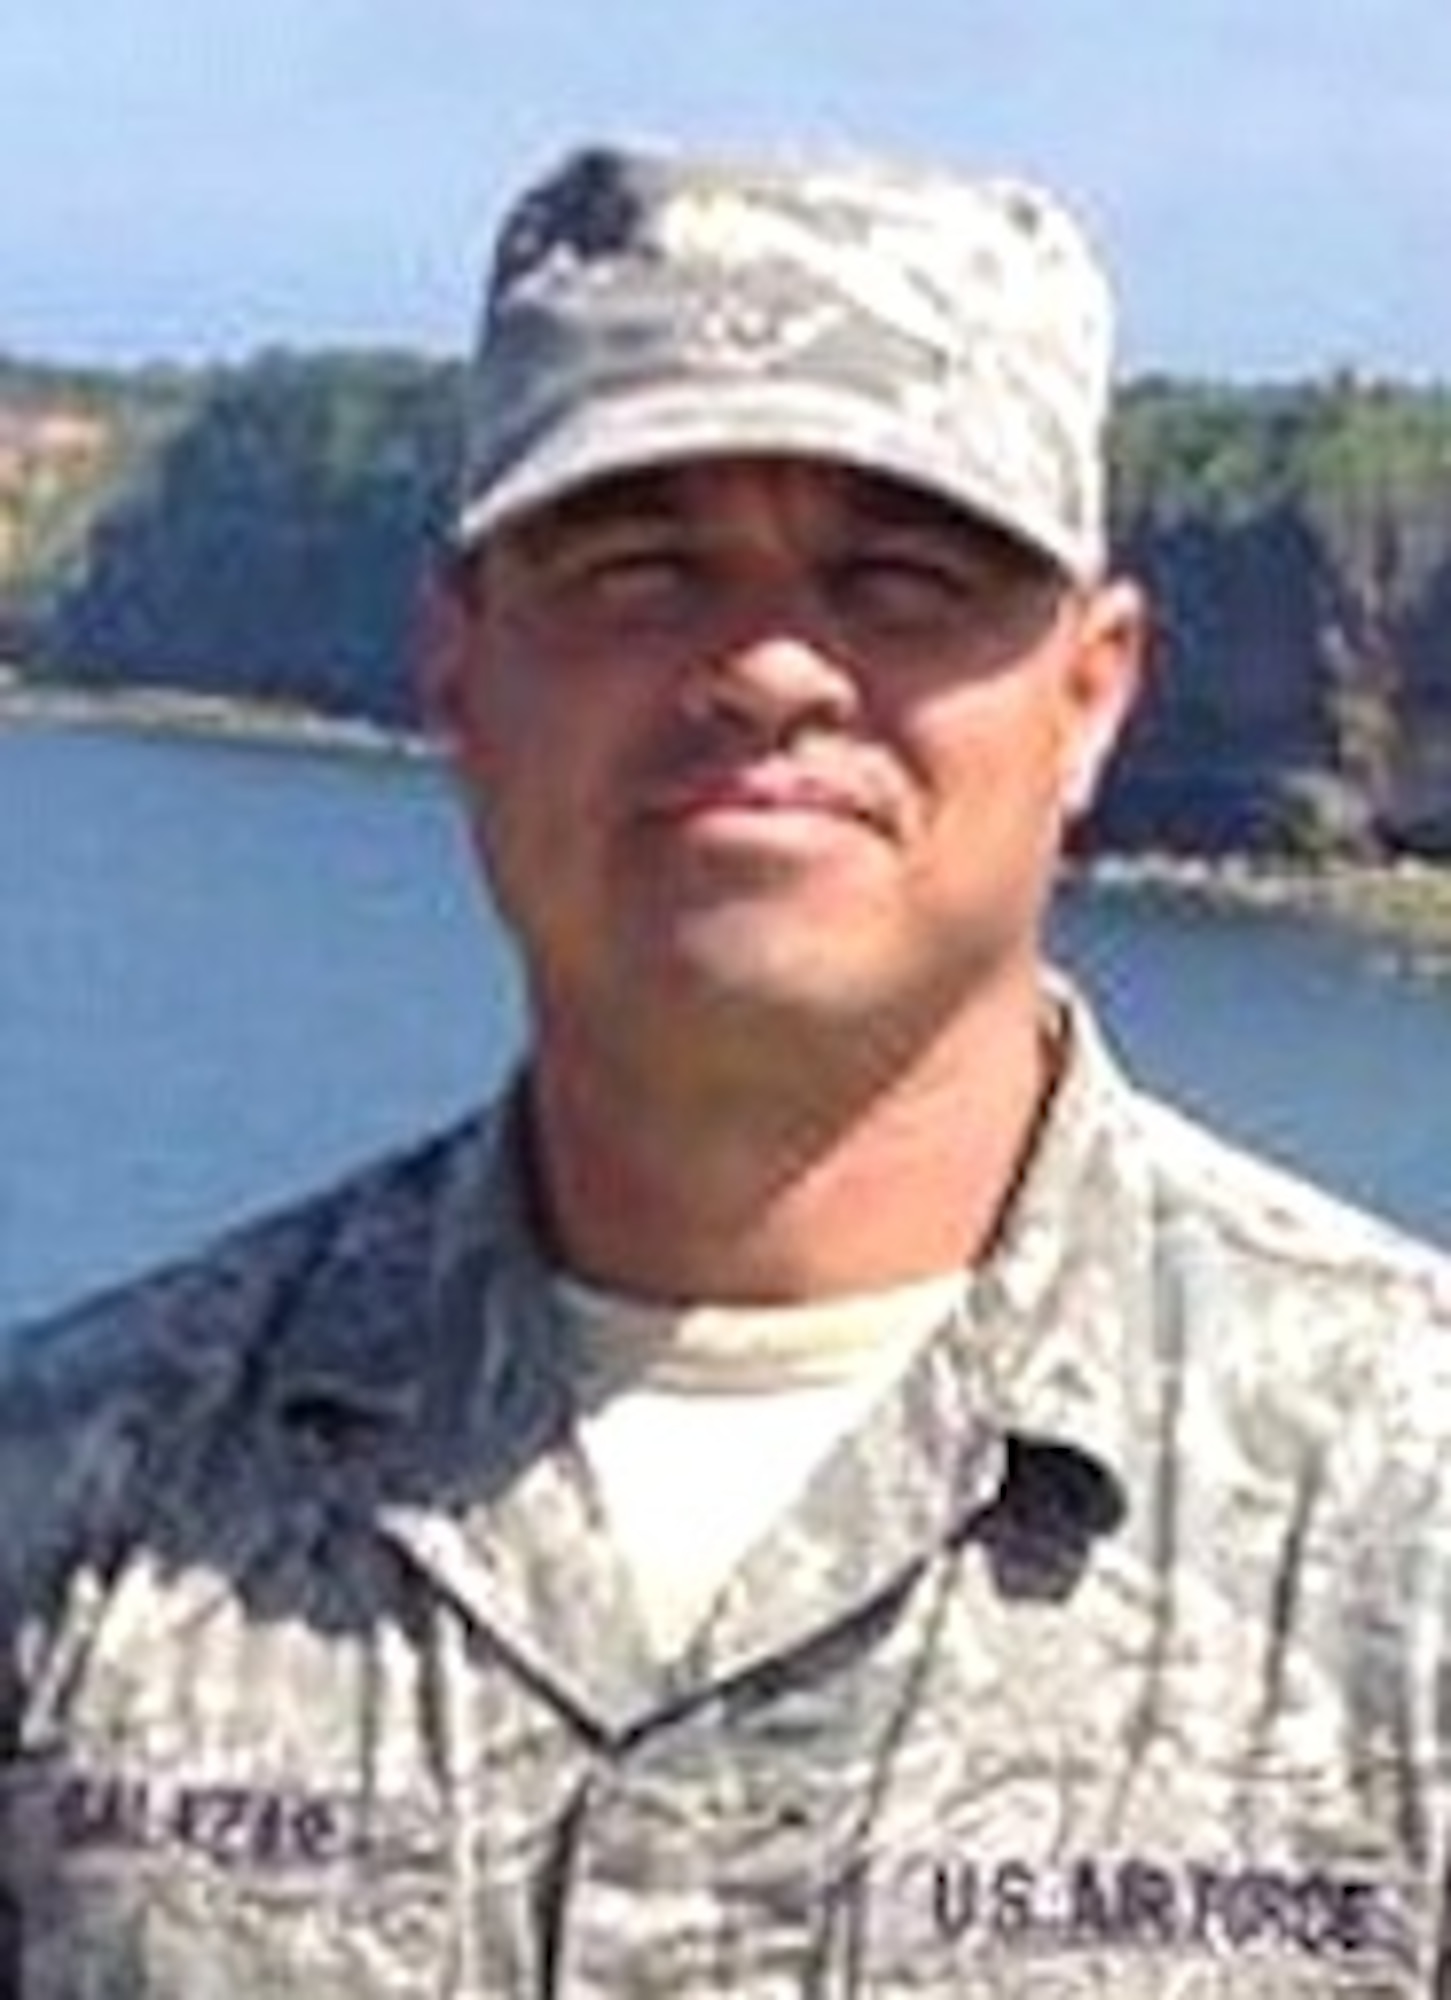 40, of Hermosa Beach, Calif., died April 13 at an air base in Southwest Asia in a non-combat related incident. He was assigned to the 577th Expeditionary Prime Base Engineer Emergency Force Sq, 1st Expeditionary Civil Engineer G, U.S. Air Forces Central Command.